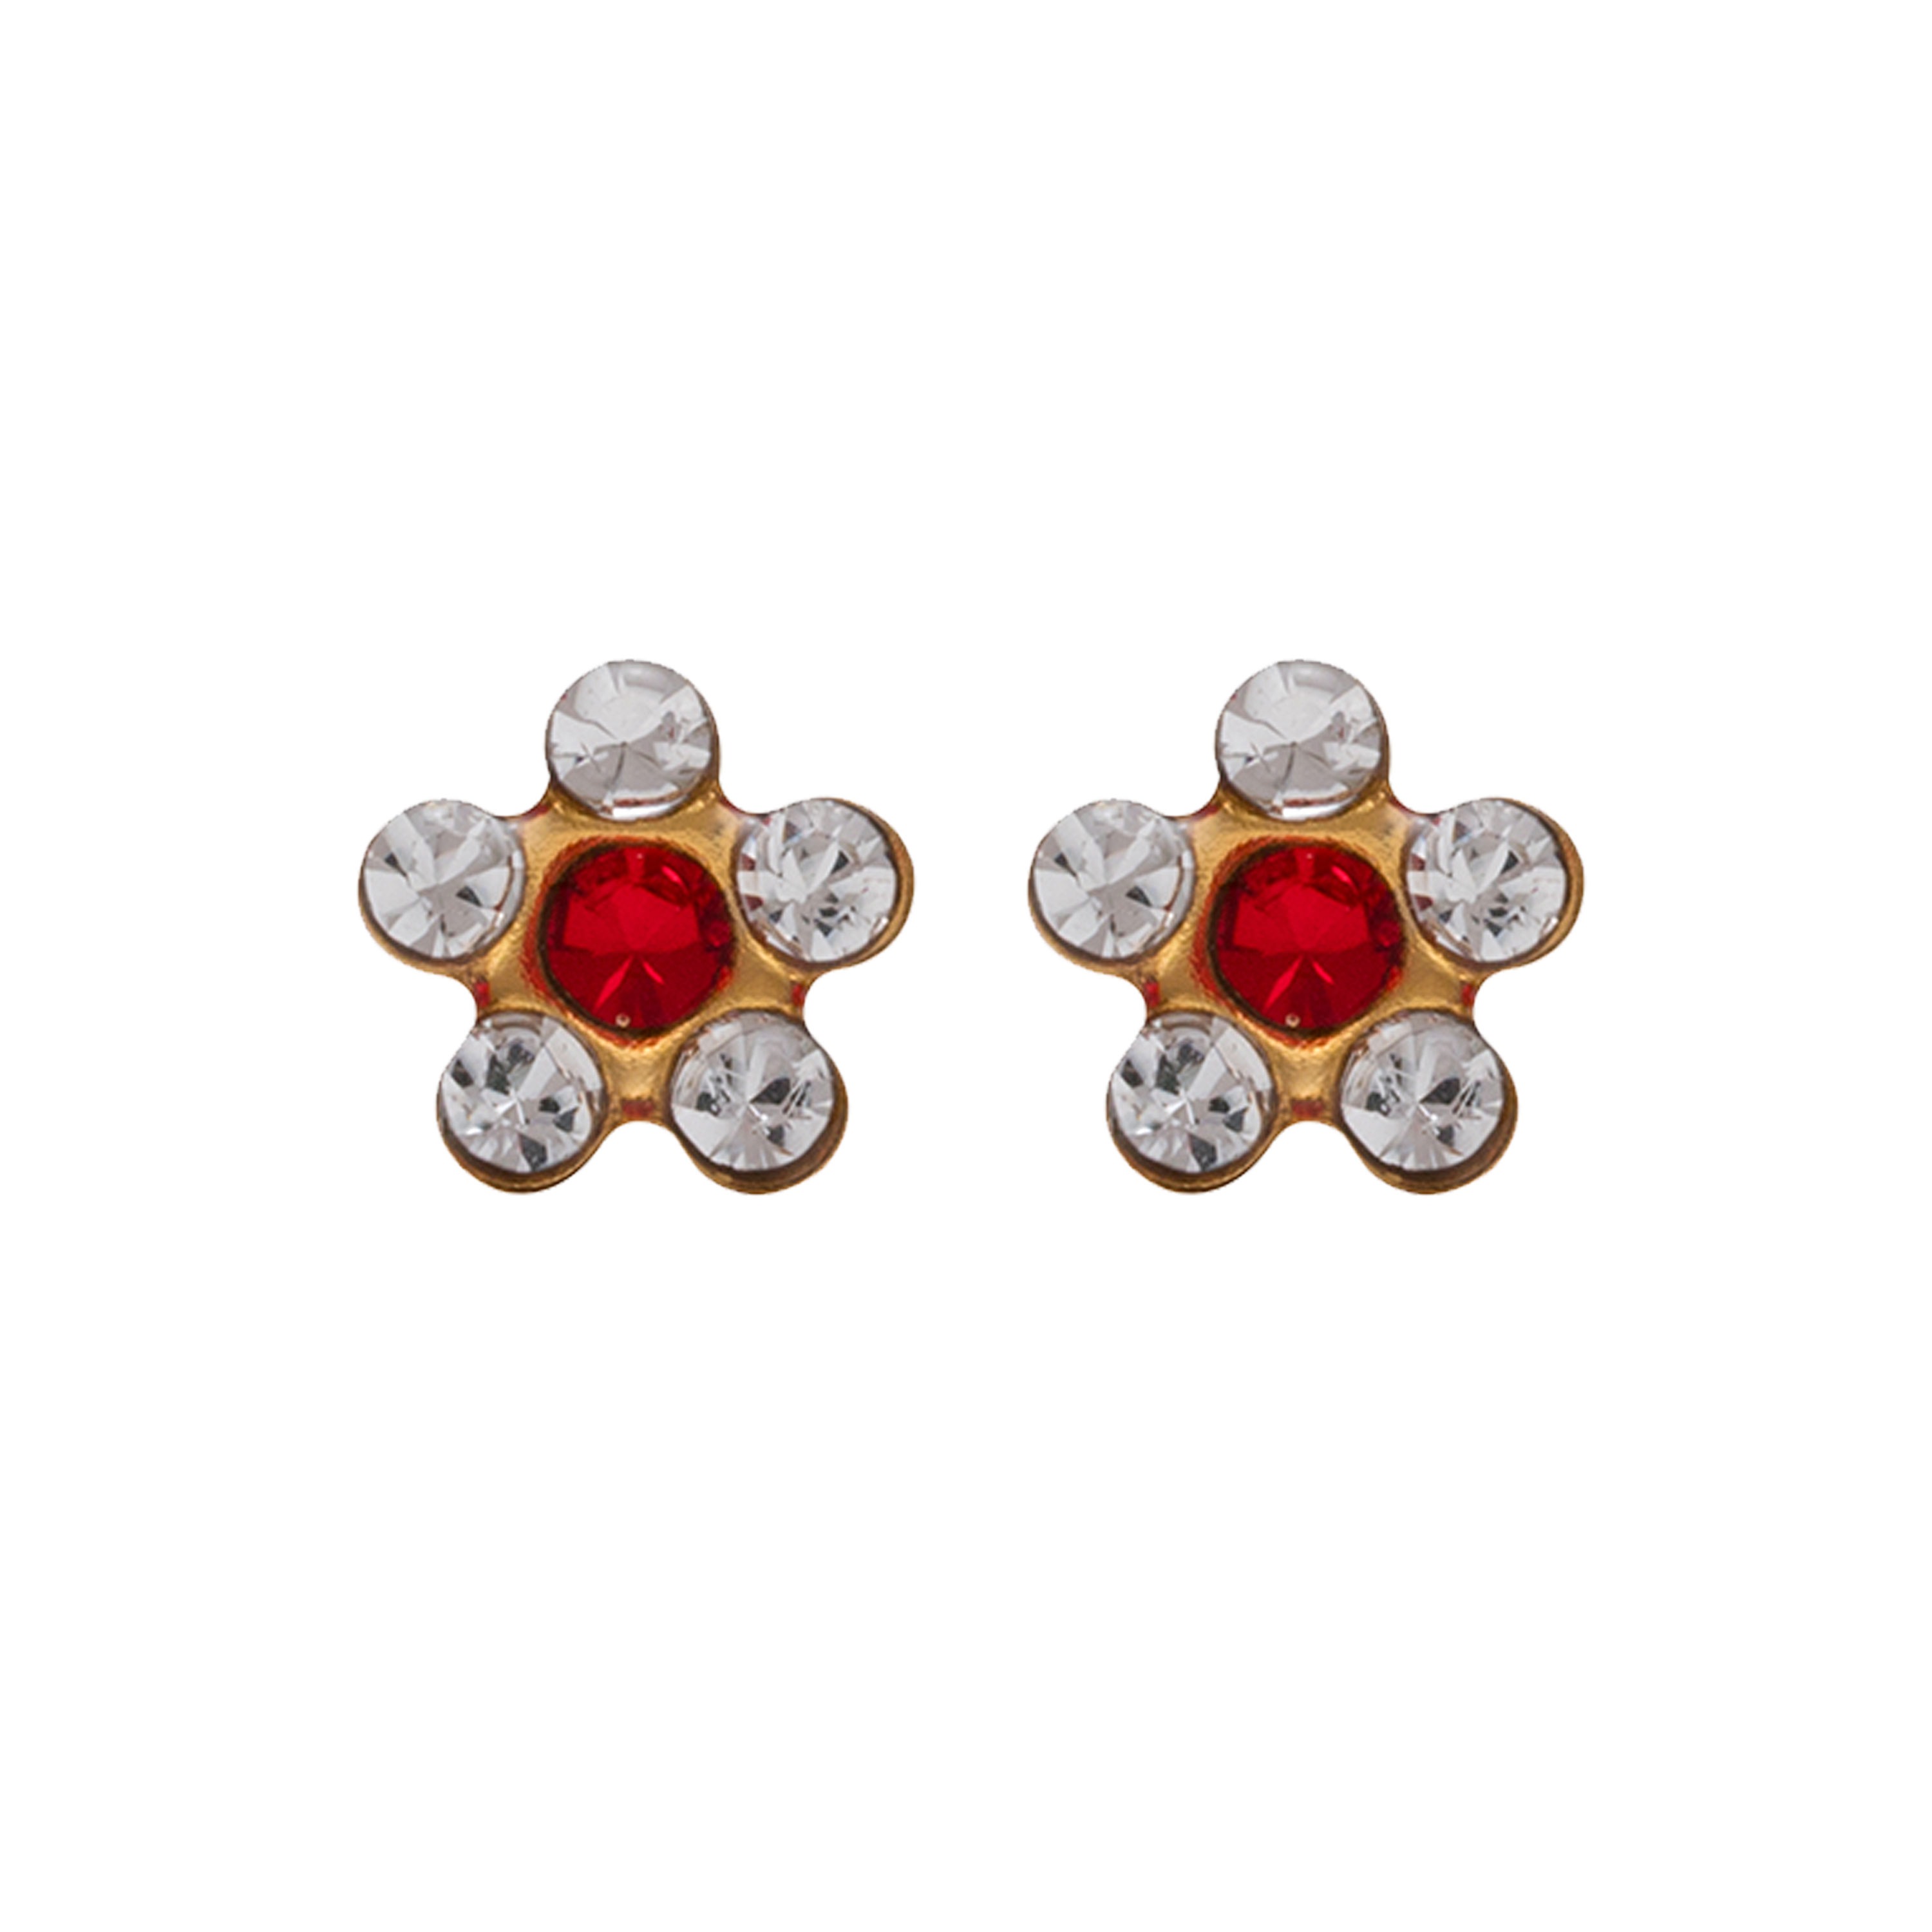 Daisy (Flower) - April Crystal - July Ruby – Red | 24K Pure Gold-Plated Piercing Earrings with Cartridge | Studex System75